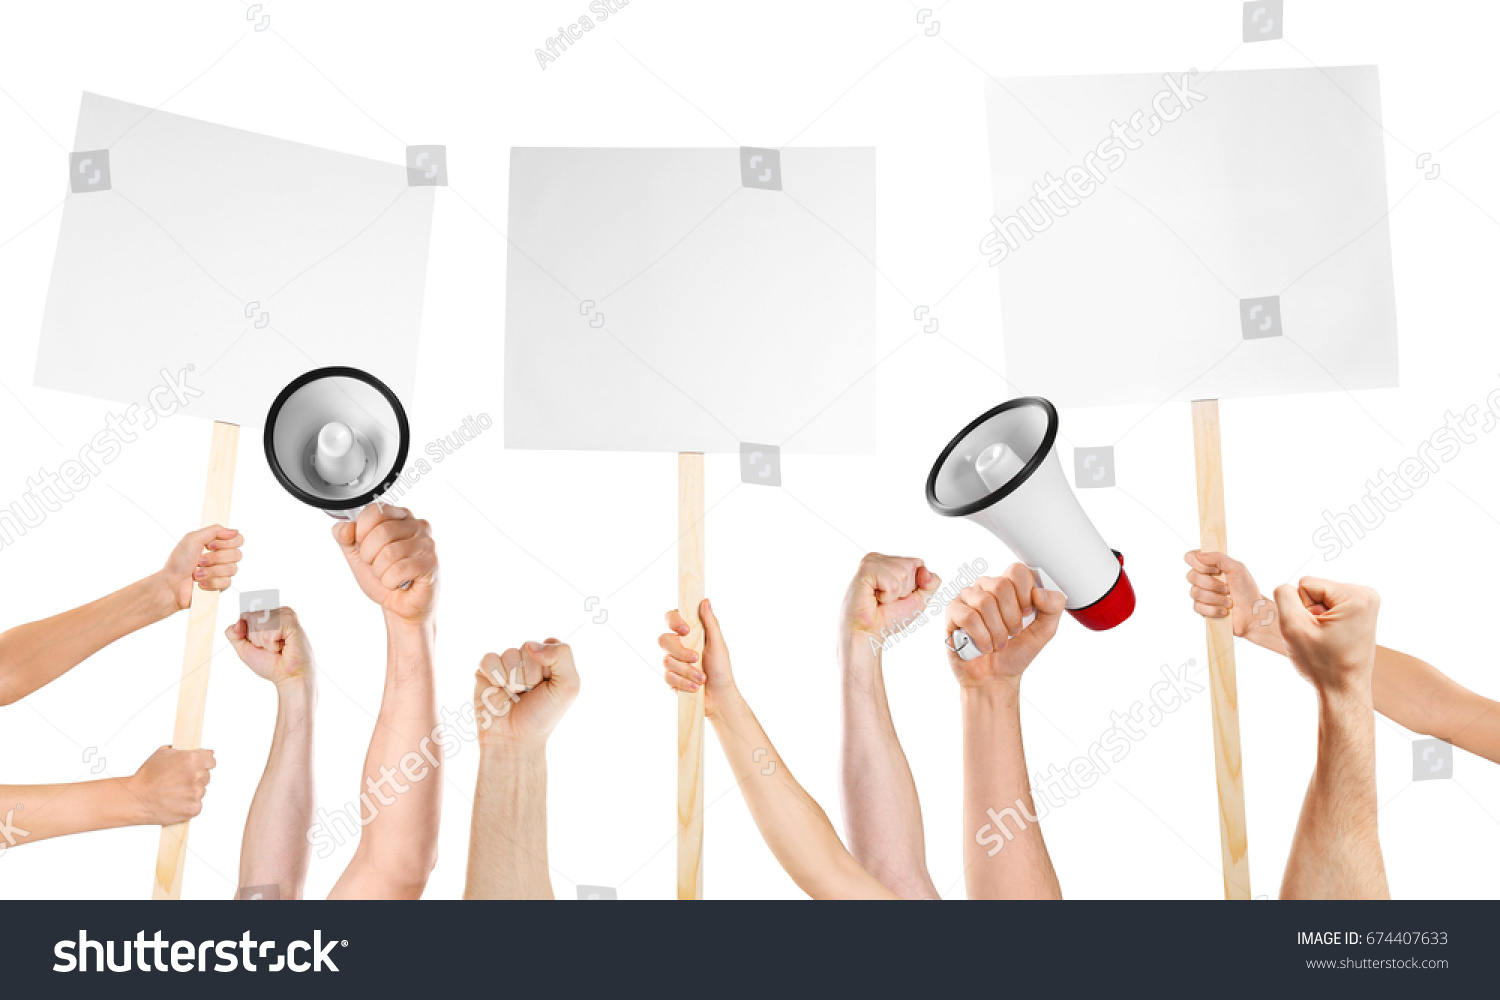 Raised human hands with megaphones and placards on white background. Strike and protest concept #674407633